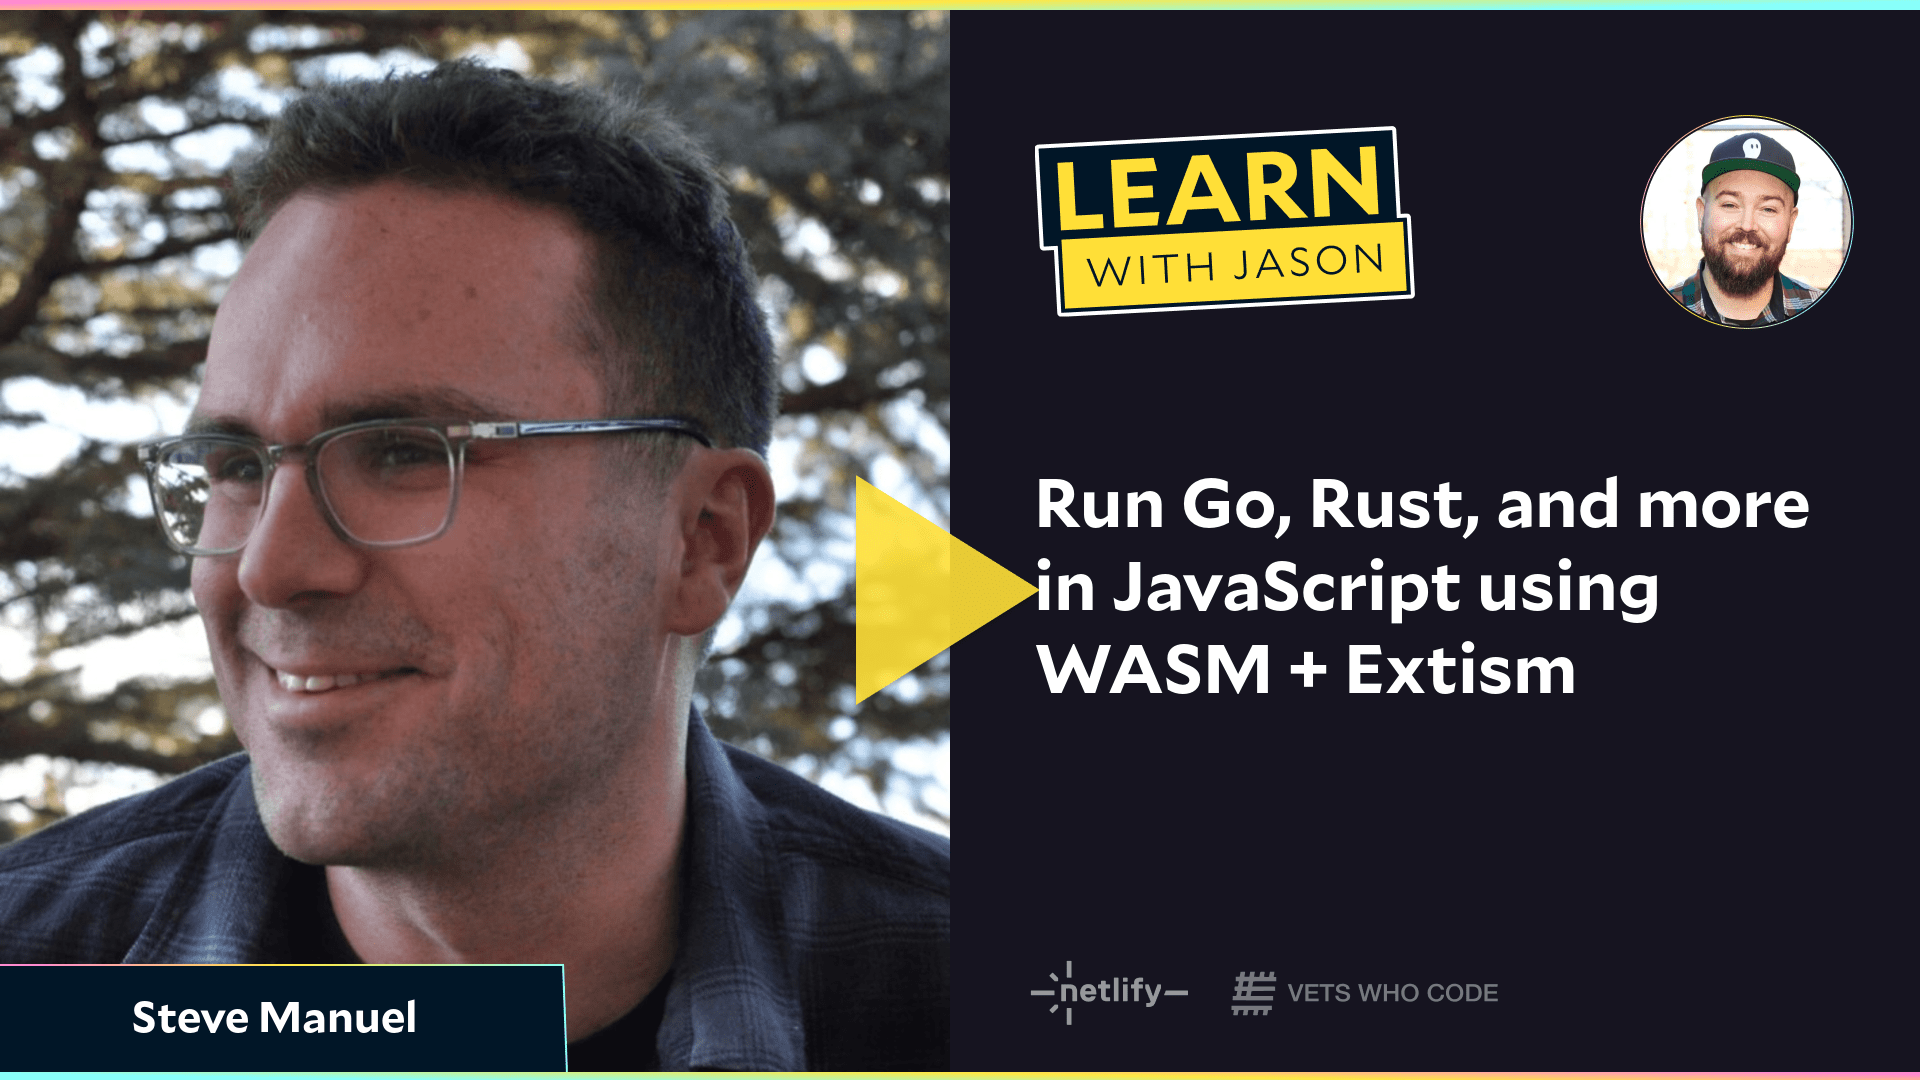 Run Go, Rust, and more in JavaScript using WASM + Extism (with Steve Manuel)